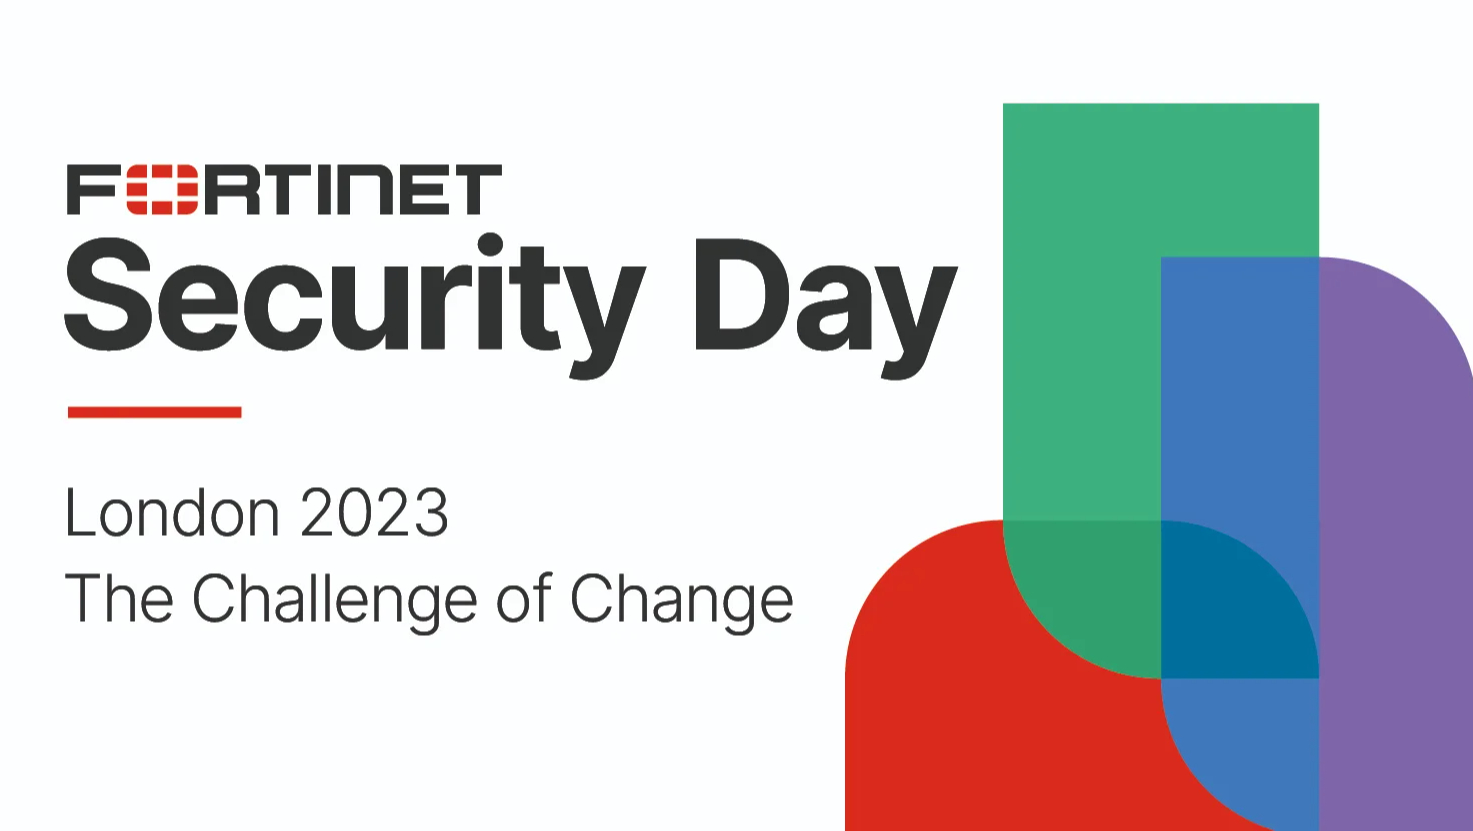 Fortinet UKI Security Day 2023